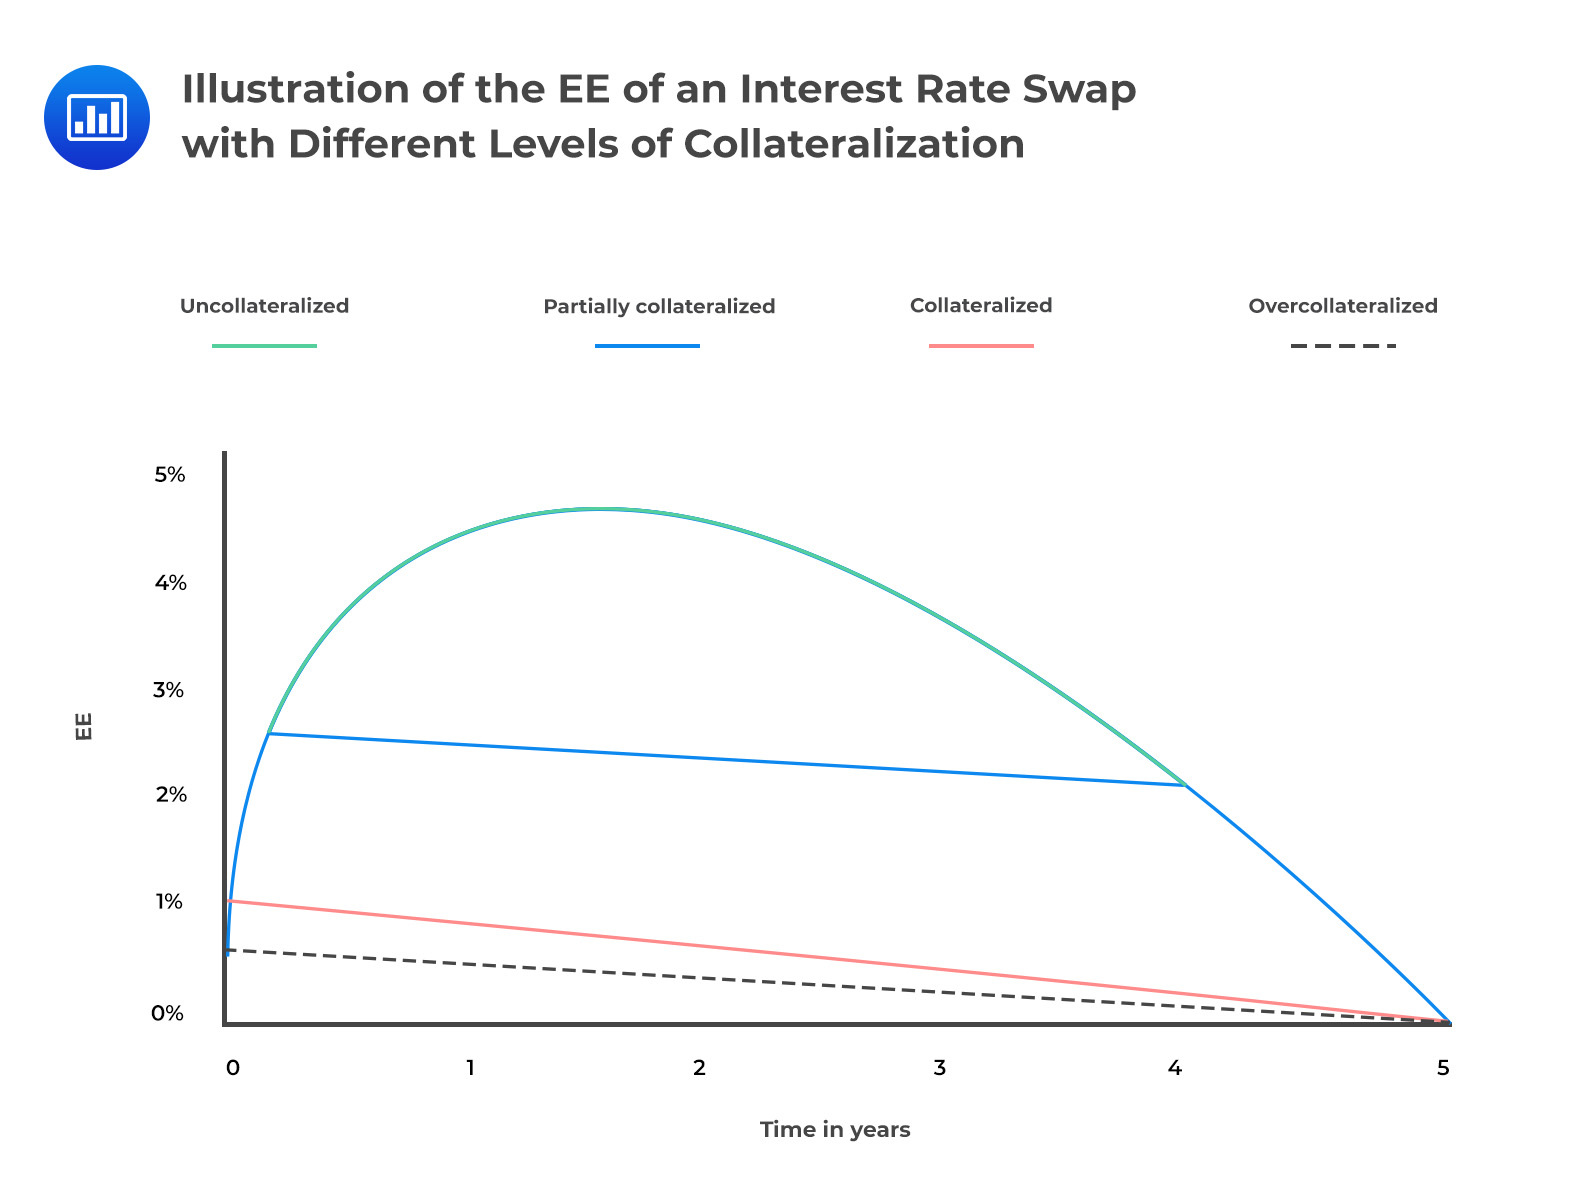 Illustration of the EE of an interest rate swap with different level of collateralization